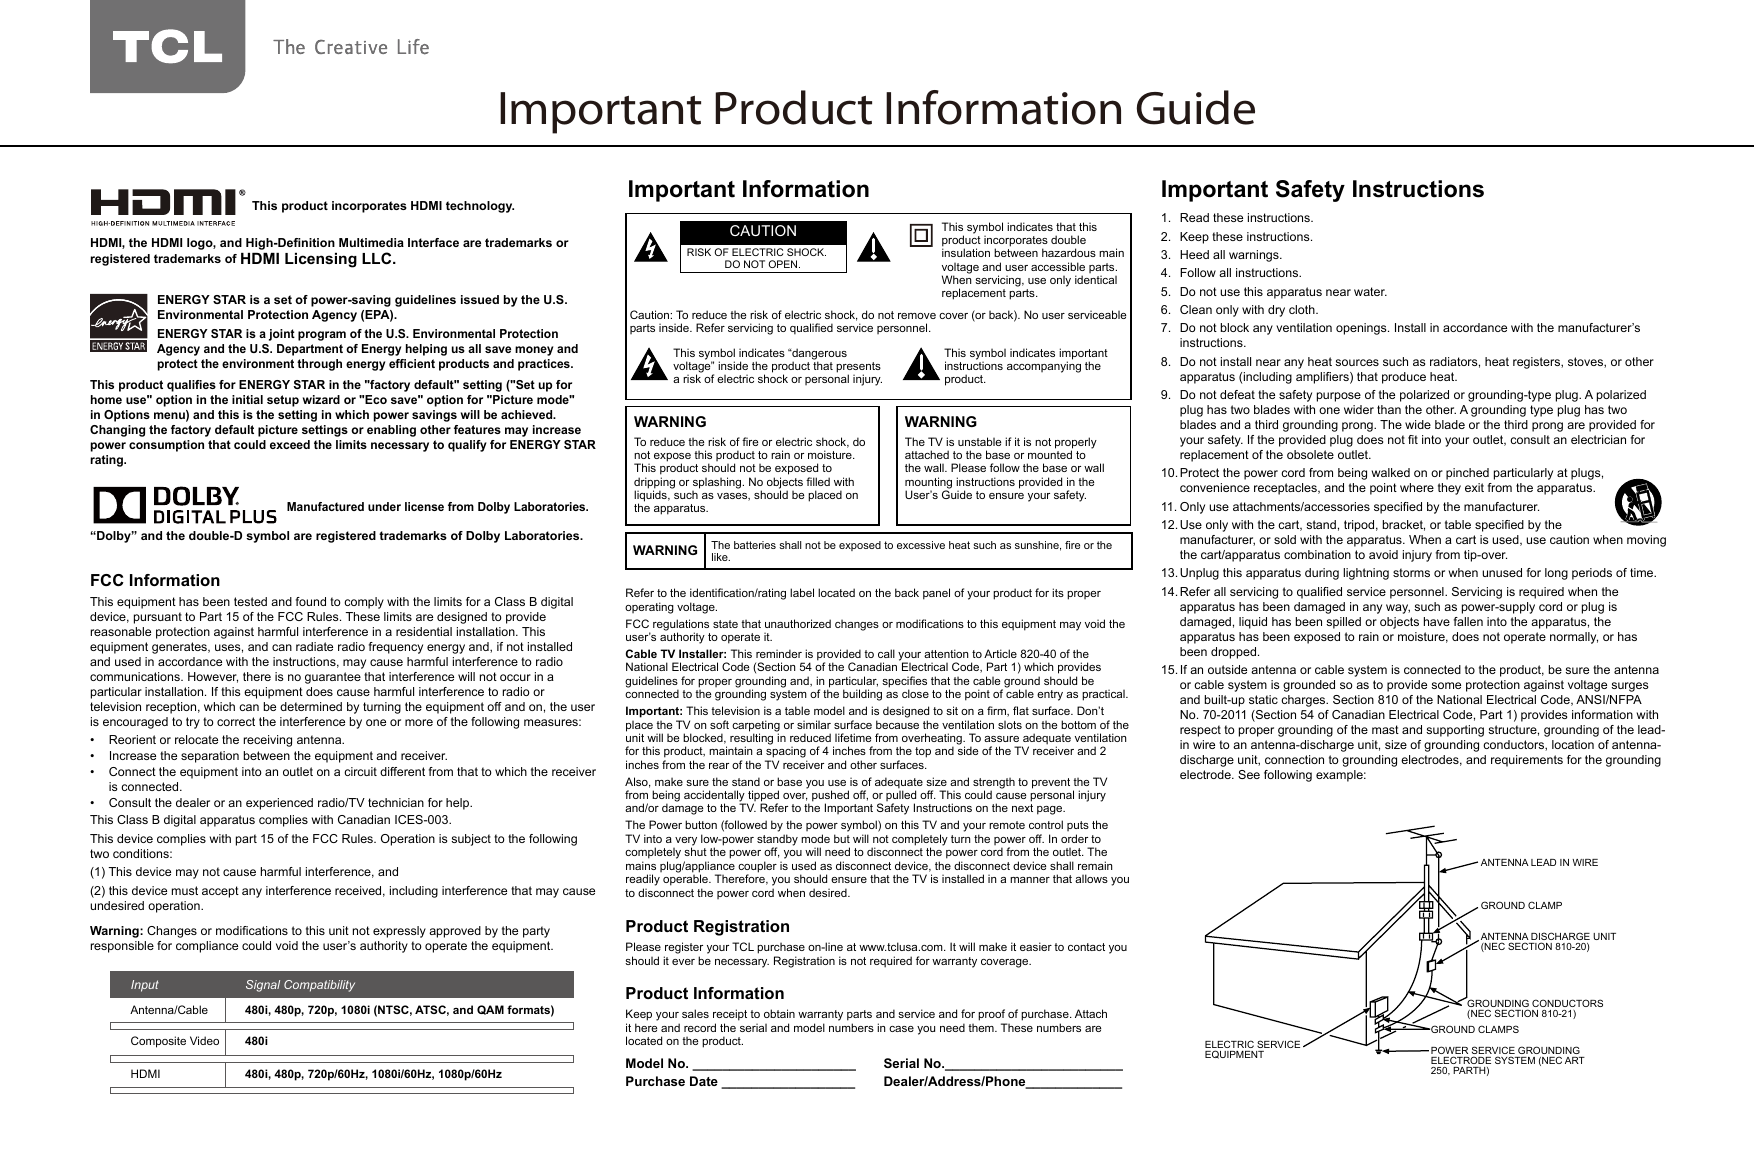 Important Product Information GuideRefer to the identication/rating label located on the back panel of your product for its proper operating voltage.FCC regulations state that unauthorized changes or modications to this equipment may void the user’s authority to operate it.Cable TV Installer: This reminder is provided to call your attention to Article 820-40 of the National Electrical Code (Section 54 of the Canadian Electrical Code, Part 1) which provides guidelines for proper grounding and, in particular, species that the cable ground should be connected to the grounding system of the building as close to the point of cable entry as practical.Important: This television is a table model and is designed to sit on a rm, at surface. Don’t place the TV on soft carpeting or similar surface because the ventilation slots on the bottom of the unit will be blocked, resulting in reduced lifetime from overheating. To assure adequate ventilation for this product, maintain a spacing of 4 inches from the top and side of the TV receiver and 2 inches from the rear of the TV receiver and other surfaces.Also, make sure the stand or base you use is of adequate size and strength to prevent the TV from being accidentally tipped over, pushed off, or pulled off. This could cause personal injury and/or damage to the TV. Refer to the Important Safety Instructions on the next page.The Power button (followed by the power symbol) on this TV and your remote control puts the TV into a very low-power standby mode but will not completely turn the power off. In order to completely shut the power off, you will need to disconnect the power cord from the outlet. The mains plug/appliance coupler is used as disconnect device, the disconnect device shall remain readily operable. Therefore, you should ensure that the TV is installed in a manner that allows you to disconnect the power cord when desired.Product RegistrationPlease register your TCL purchase on-line at www.tclusa.com. It will make it easier to contact you should it ever be necessary. Registration is not required for warranty coverage.Product InformationKeep your sales receipt to obtain warranty parts and service and for proof of purchase. Attach it here and record the serial and model numbers in case you need them. These numbers are located on the product.Model No. ______________________ Serial No.________________________Purchase Date __________________ Dealer/Address/Phone_____________Caution: To reduce the risk of electric shock, do not remove cover (or back). No user serviceable parts inside. Refer servicing to qualied service personnel.This symbol indicates “dangerous voltage” inside the product that presents a risk of electric shock or personal injury.This symbol indicates important instructions accompanying the product.This symbol indicates that this product incorporates double insulation between hazardous main voltage and user accessible parts. When servicing, use only identical replacement parts.CAUTIONRISK OF ELECTRIC SHOCK.DO NOT OPEN.Important InformationWARNING The batteries shall not be exposed to excessive heat such as sunshine, re or the like.WARNINGTo reduce the risk of re or electric shock, do not expose this product to rain or moisture. This product should not be exposed to dripping or splashing. No objects lled with liquids, such as vases, should be placed on the apparatus.WARNINGThe TV is unstable if it is not properly attached to the base or mounted to the wall. Please follow the base or wall mounting instructions provided in the User’s Guide to ensure your safety.Important Safety Instructions1.  Read these instructions.2.  Keep these instructions.3.  Heed all warnings.4.  Follow all instructions.5.  Do not use this apparatus near water.6.  Clean only with dry cloth.7.  Do not block any ventilation openings. Install in accordance with the manufacturer’s instructions.8.  Do not install near any heat sources such as radiators, heat registers, stoves, or other apparatus (including ampliers) that produce heat.9.  Do not defeat the safety purpose of the polarized or grounding-type plug. A polarized plug has two blades with one wider than the other. A grounding type plug has two blades and a third grounding prong. The wide blade or the third prong are provided for your safety. If the provided plug does not t into your outlet, consult an electrician for replacement of the obsolete outlet.10. Protect the power cord from being walked on or pinched particularly at plugs, convenience receptacles, and the point where they exit from the apparatus.11. Only use attachments/accessories specied by the manufacturer.12. Use only with the cart, stand, tripod, bracket, or table specied by the                manufacturer, or sold with the apparatus. When a cart is used, use caution when moving the cart/apparatus combination to avoid injury from tip-over.13. Unplug this apparatus during lightning storms or when unused for long periods of time.14. Refer all servicing to qualied service personnel. Servicing is required when the apparatus has been damaged in any way, such as power-supply cord or plug is damaged, liquid has been spilled or objects have fallen into the apparatus, the apparatus has been exposed to rain or moisture, does not operate normally, or has been dropped.15. If an outside antenna or cable system is connected to the product, be sure the antenna or cable system is grounded so as to provide some protection against voltage surges and built-up static charges. Section 810 of the National Electrical Code, ANSI/NFPA No. 70-2011 (Section 54 of Canadian Electrical Code, Part 1) provides information with respect to proper grounding of the mast and supporting structure, grounding of the lead-in wire to an antenna-discharge unit, size of grounding conductors, location of antenna-discharge unit, connection to grounding electrodes, and requirements for the grounding electrode. See following example:ANTENNA LEAD IN WIREGROUND CLAMPGROUNDING CONDUCTORS(NEC SECTION 810-21)GROUND CLAMPSPOWER SERVICE GROUNDINGELECTRODE SYSTEM(NEC ART 250, PARTH)ELECTRIC SERVICEEQUIPMENTANTENNA DISCHARGE UNIT(NEC SECTION 810-20)ANTENNA LEAD IN WIREGROUND CLAMPANTENNA DISCHARGE UNIT (NEC SECTION 810-20)GROUND CLAMPSGROUNDING CONDUCTORS (NEC SECTION 810-21)ELECTRIC SERVICE EQUIPMENT POWER SERVICE GROUNDING ELECTRODE SYSTEM (NEC ART 250, PARTH) This product incorporates HDMI technology.HDMI, the HDMI logo, and High-Denition Multimedia Interface are trademarks or registered trademarks of HDMI Licensing LLC.FCC InformationThis equipment has been tested and found to comply with the limits for a Class B digital device, pursuant to Part 15 of the FCC Rules. These limits are designed to provide reasonable protection against harmful interference in a residential installation. This equipment generates, uses, and can radiate radio frequency energy and, if not installed and used in accordance with the instructions, may cause harmful interference to radio communications. However, there is no guarantee that interference will not occur in a particular installation. If this equipment does cause harmful interference to radio or television reception, which can be determined by turning the equipment off and on, the user is encouraged to try to correct the interference by one or more of the following measures:•  Reorient or relocate the receiving antenna.•  Increase the separation between the equipment and receiver.•  Connect the equipment into an outlet on a circuit different from that to which the receiver is connected.•  Consult the dealer or an experienced radio/TV technician for help.This Class B digital apparatus complies with Canadian ICES-003.This device complies with part 15 of the FCC Rules. Operation is subject to the following two conditions: (1) This device may not cause harmful interference, and (2) this device must accept any interference received, including interference that may cause undesired operation.Warning: Changes or modications to this unit not expressly approved by the party responsible for compliance could void the user’s authority to operate the equipment.Input  Signal CompatibilityAntenna/Cable 480i, 480p, 720p, 1080i (NTSC, ATSC, and QAM formats)Composite Video 480iHDMI 480i, 480p, 720p/60Hz, 1080i/60Hz, 1080p/60Hz    Manufactured under license from Dolby Laboratories. “Dolby” and the double-D symbol are registered trademarks of Dolby Laboratories.ENERGY STAR is a set of power-saving guidelines issued by the U.S. Environmental Protection Agency (EPA).ENERGY STAR is a joint program of the U.S. Environmental Protection Agency and the U.S. Department of Energy helping us all save money and protect the environment through energy efcient products and practices.This product qualies for ENERGY STAR in the &quot;factory default&quot; setting (&quot;Set up for home use&quot; option in the initial setup wizard or &quot;Eco save&quot; option for &quot;Picture mode&quot; in Options menu) and this is the setting in which power savings will be achieved. Changing the factory default picture settings or enabling other features may increase power consumption that could exceed the limits necessary to qualify for ENERGY STAR rating.